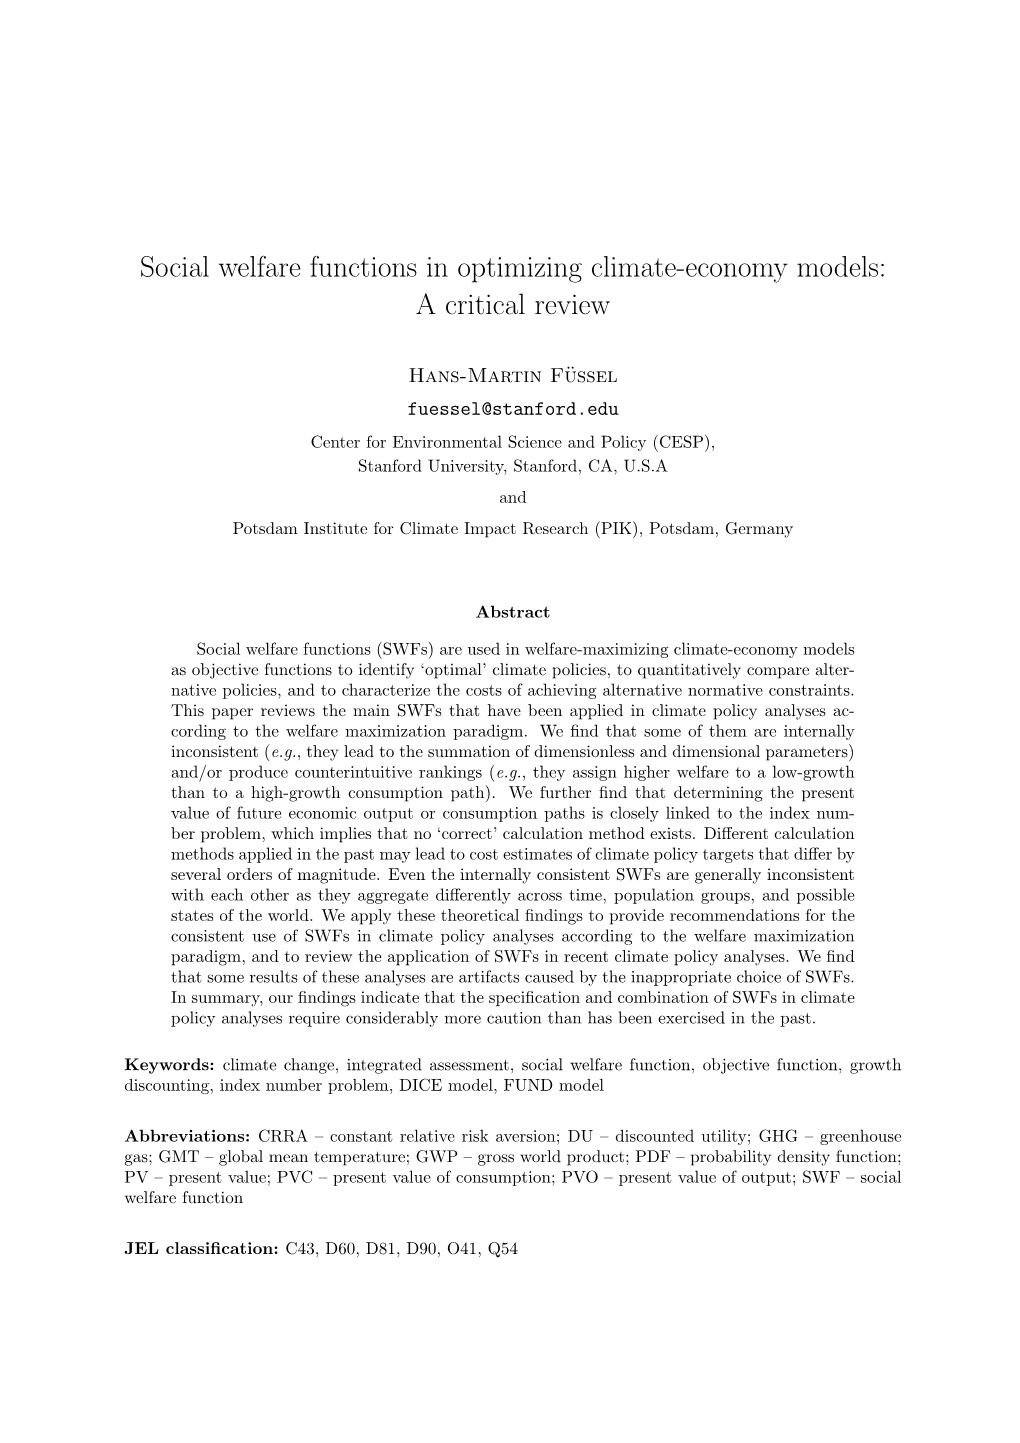 Social Welfare Functions in Optimizing Climate-Economy Models: a Critical Review